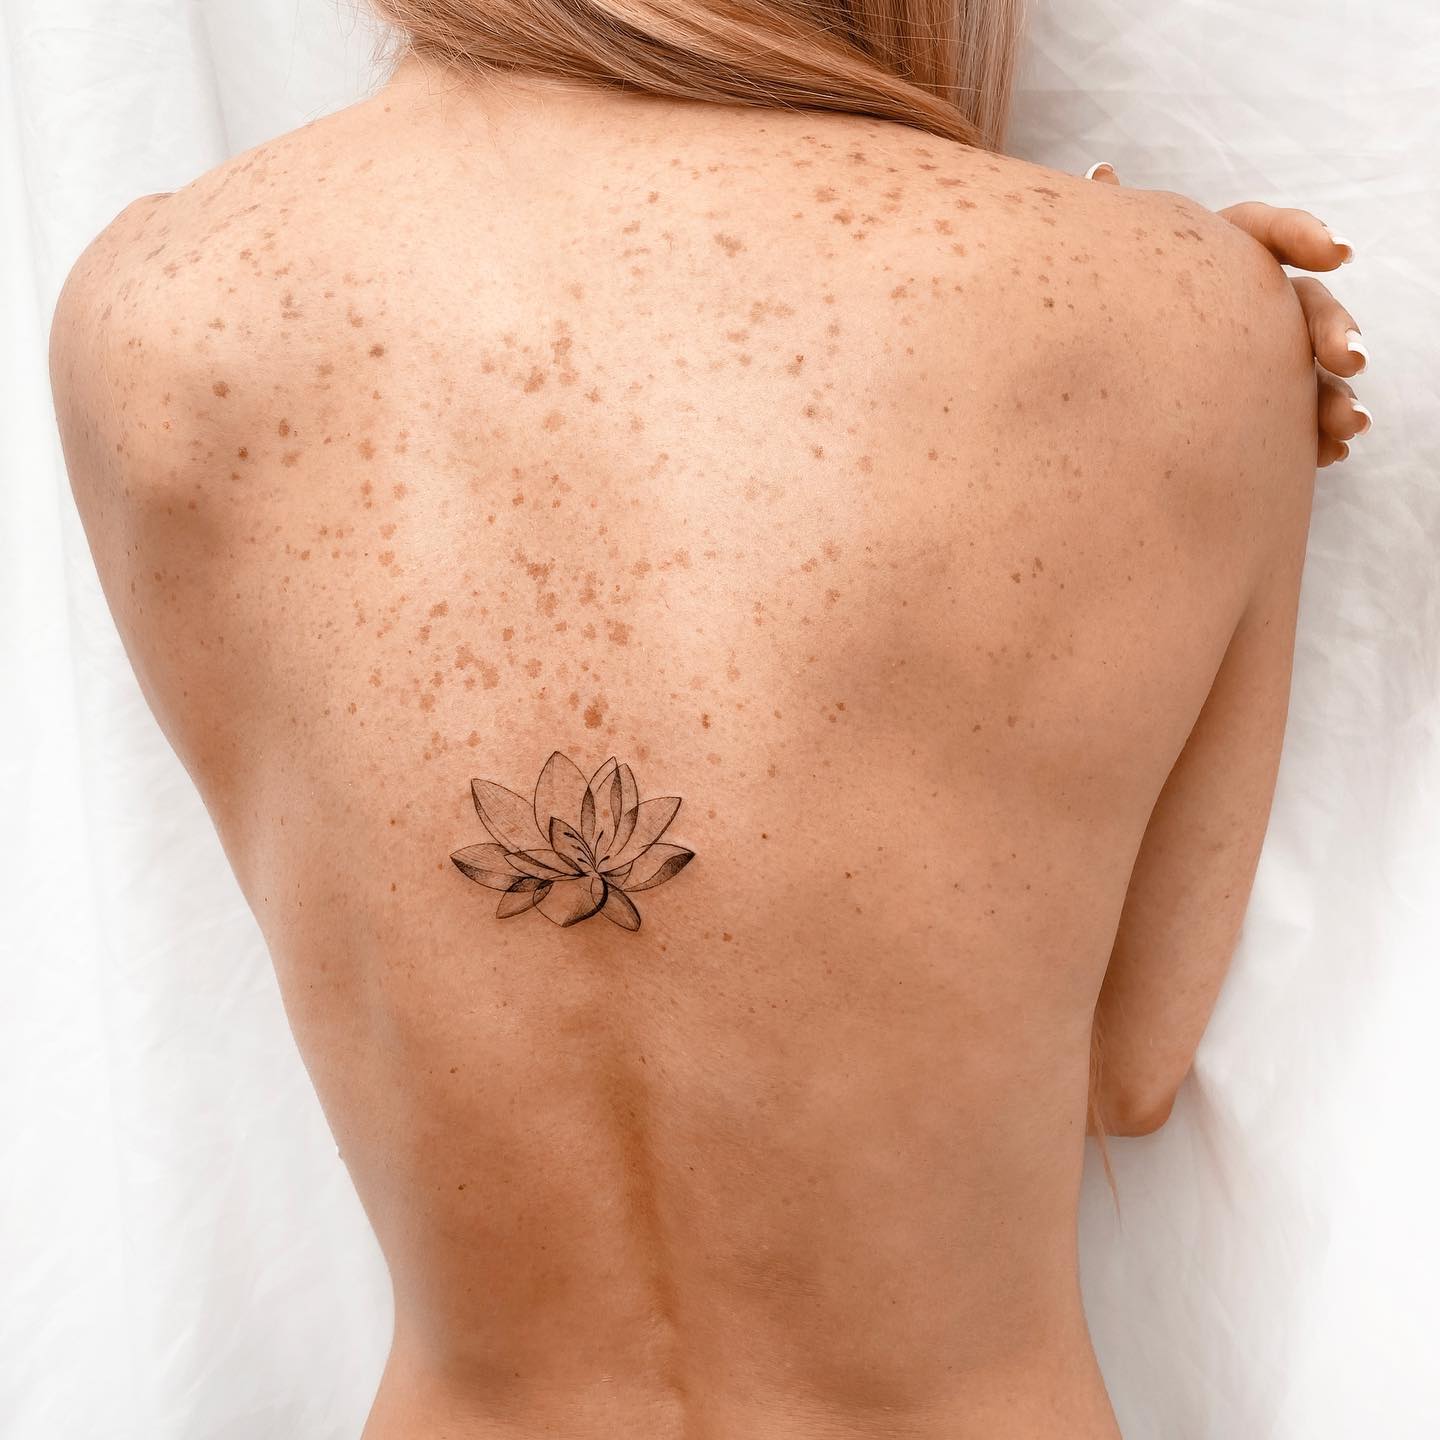 One line rose tattoo on the upper back.